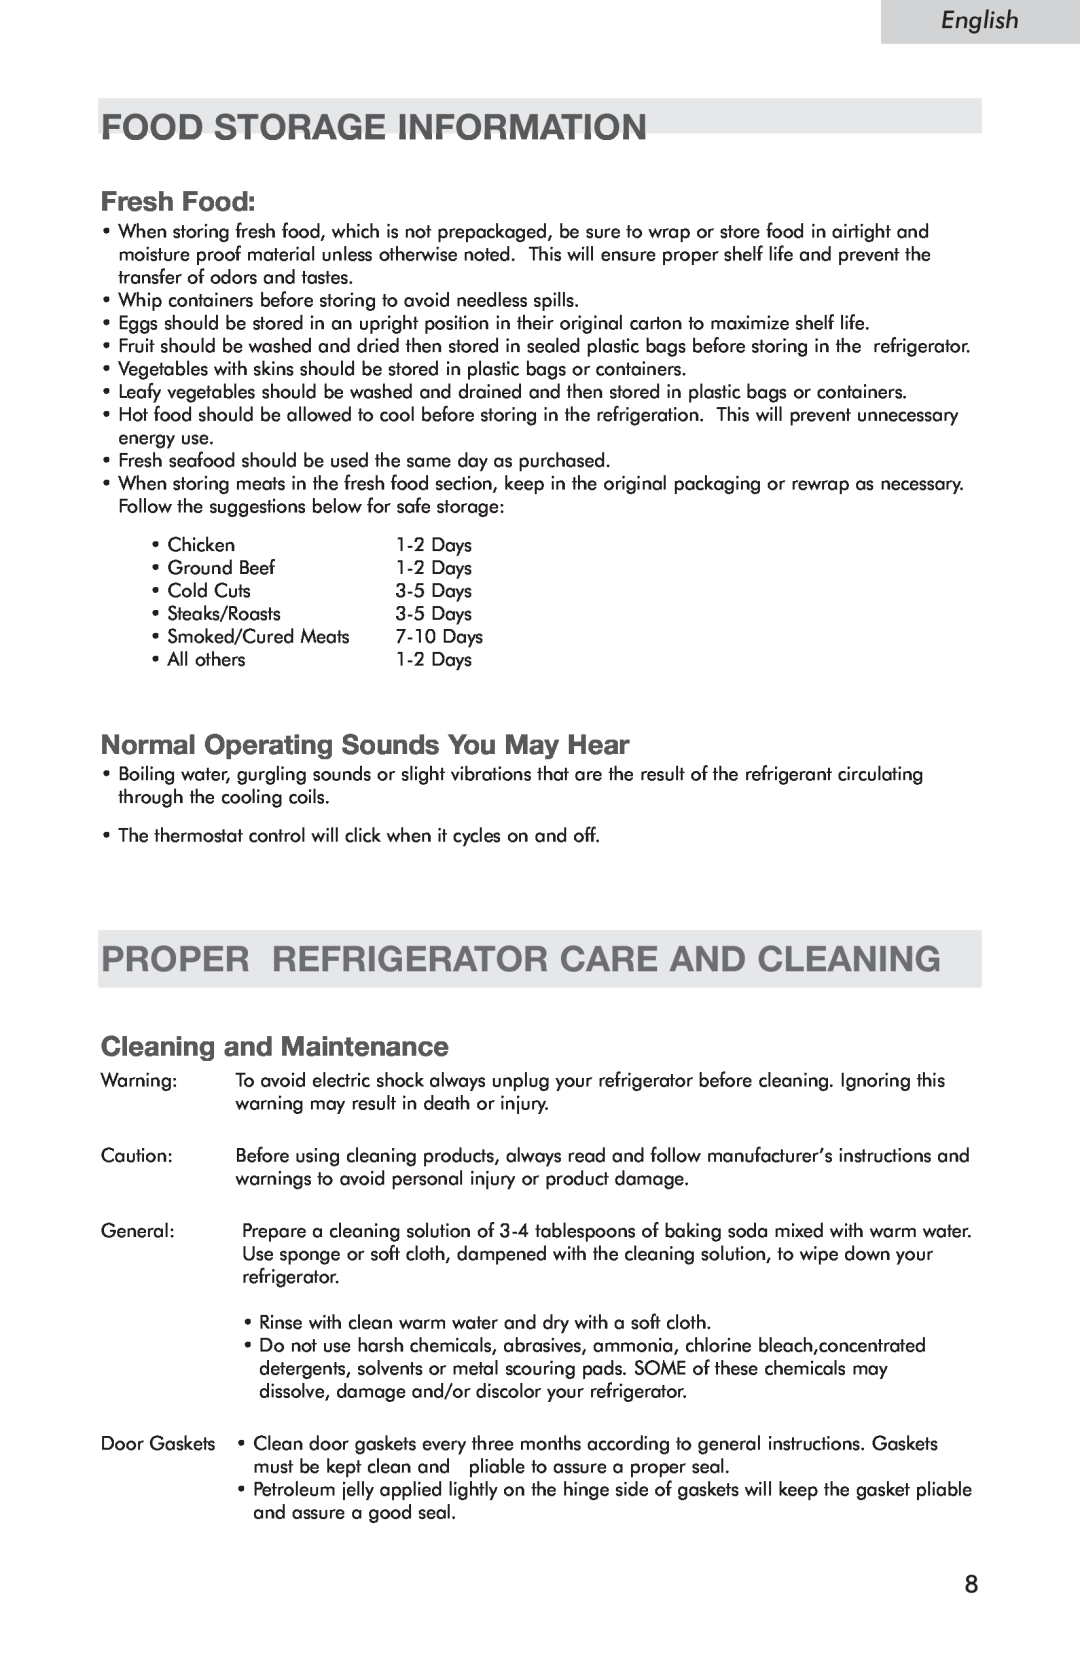 Haier HSE04WNC Food Storage Information, Proper Refrigerator Care And Cleaning, Fresh Food, Cleaning and Maintenance 